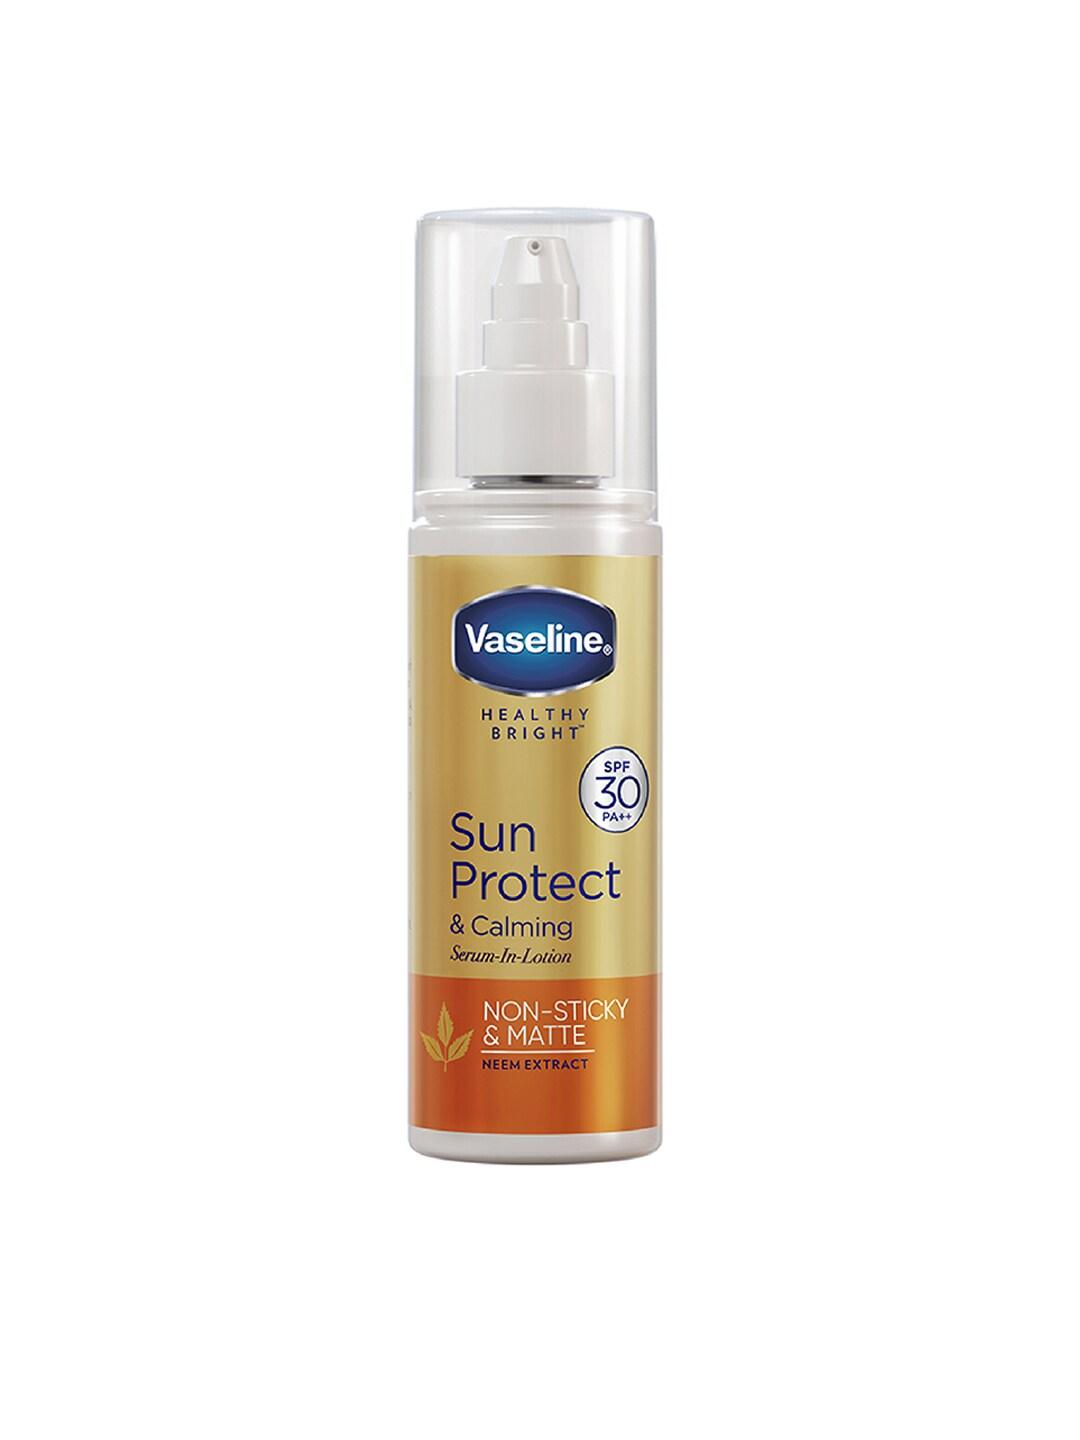 Vaseline Sun Protect & Calming SPF 30 Body Serum Lotion with Neem Extracts - 180ml